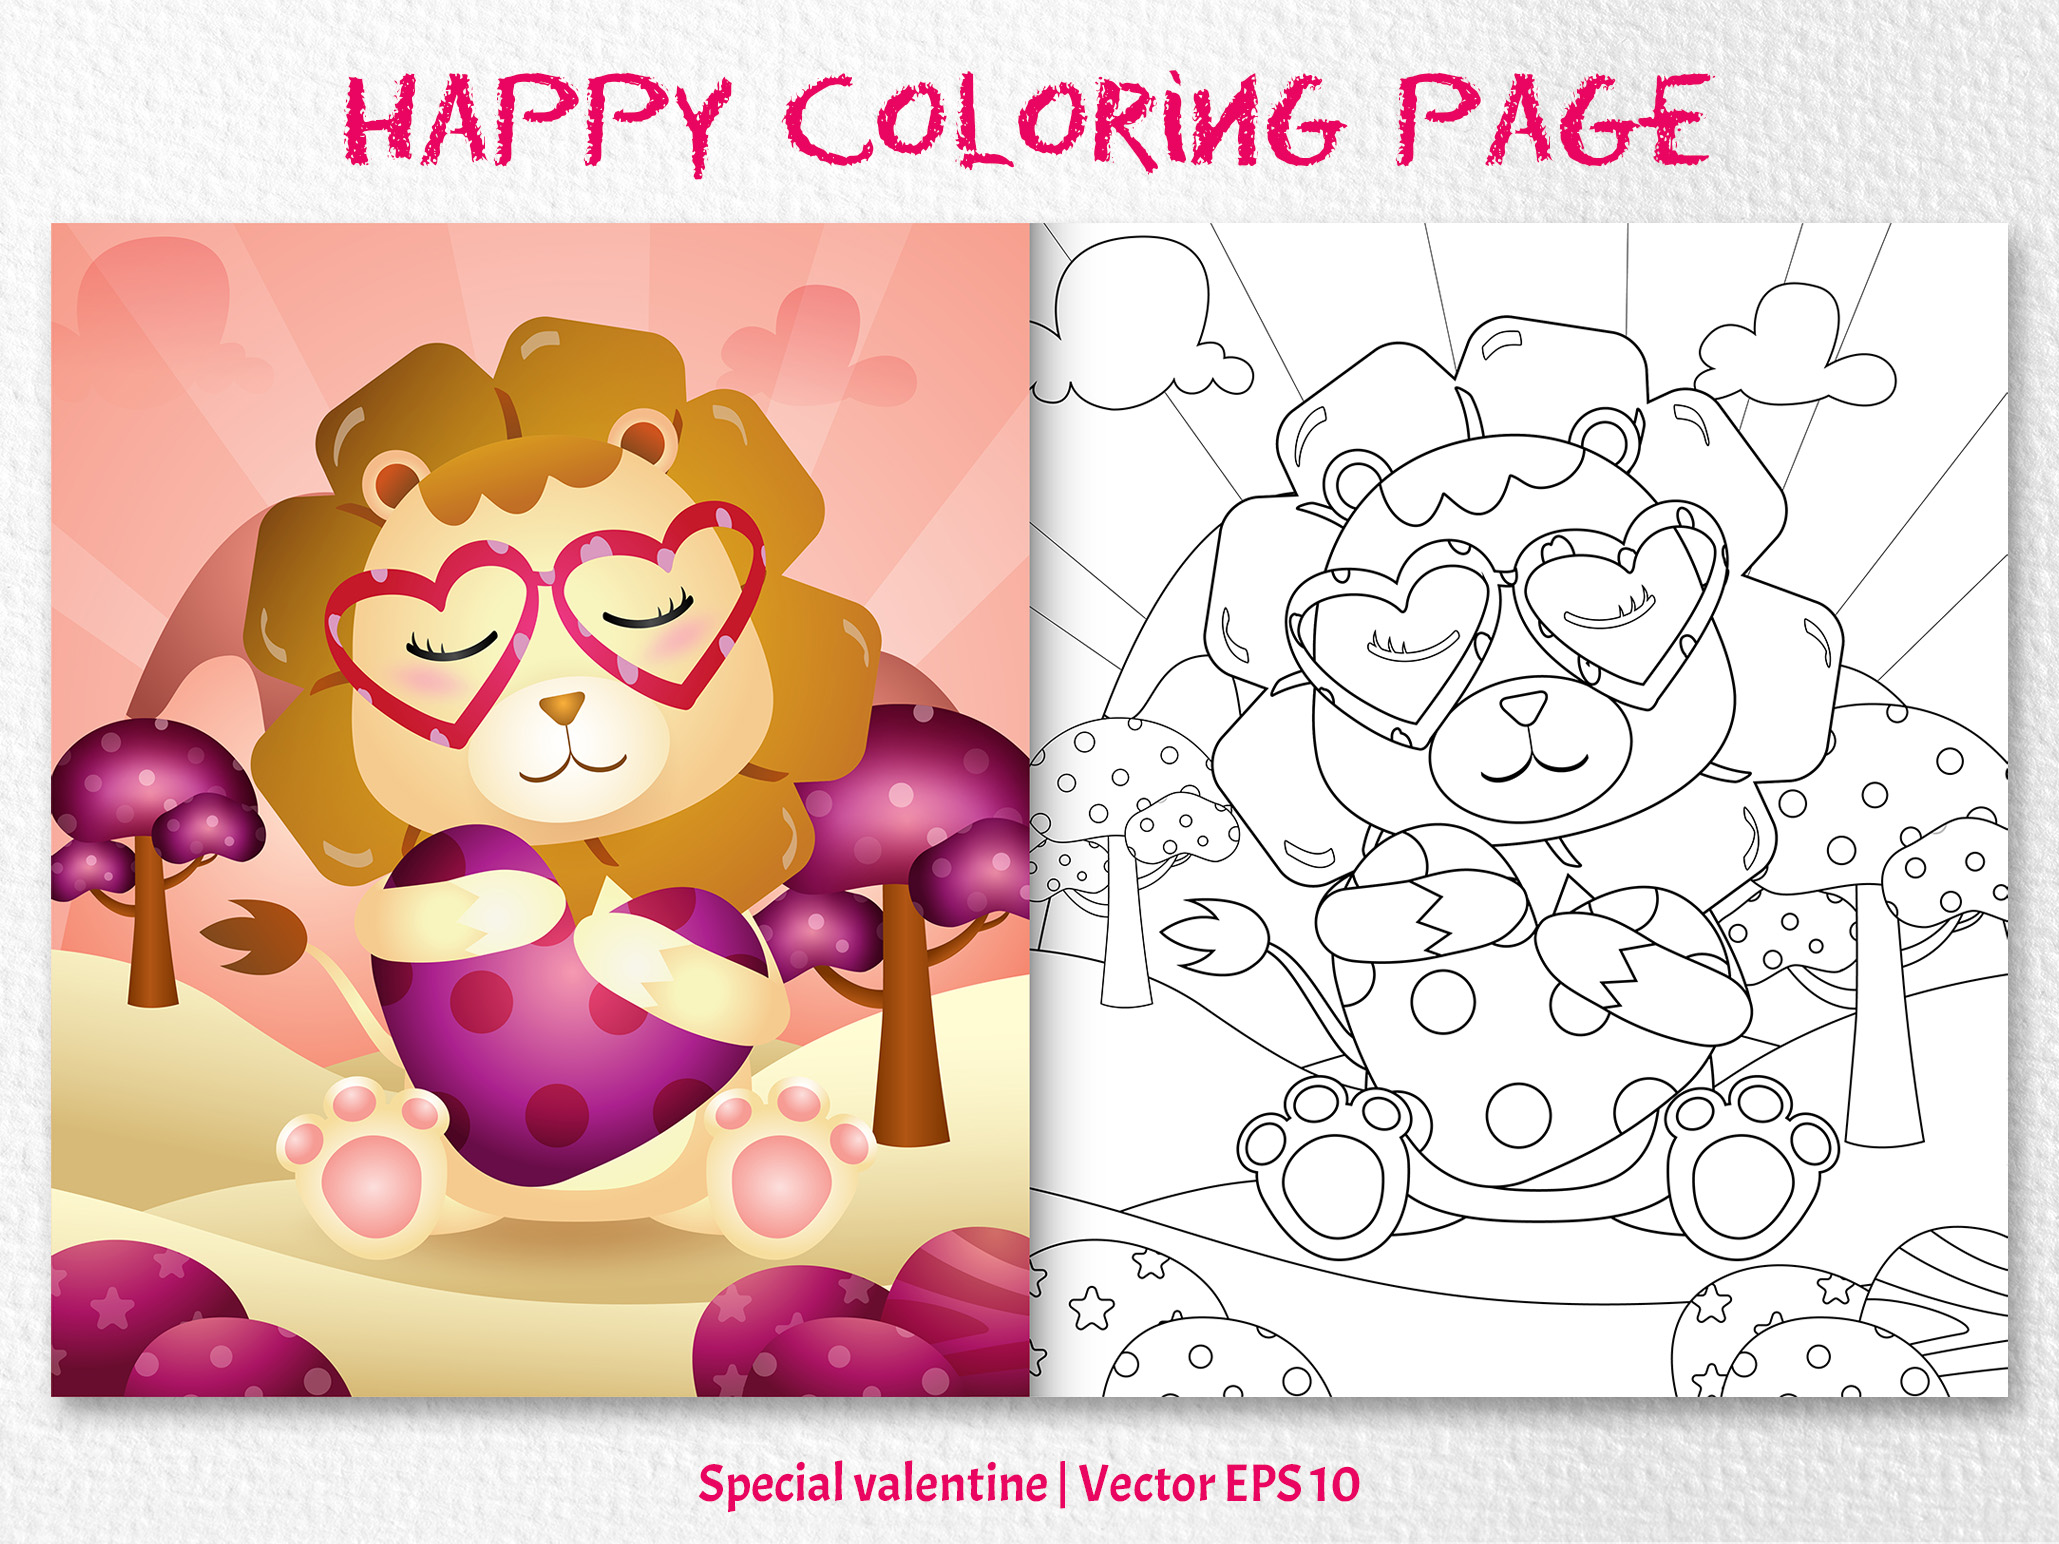 a-cute-lion-coloring-pages-graphic-by-wijayariko-creative-fabrica